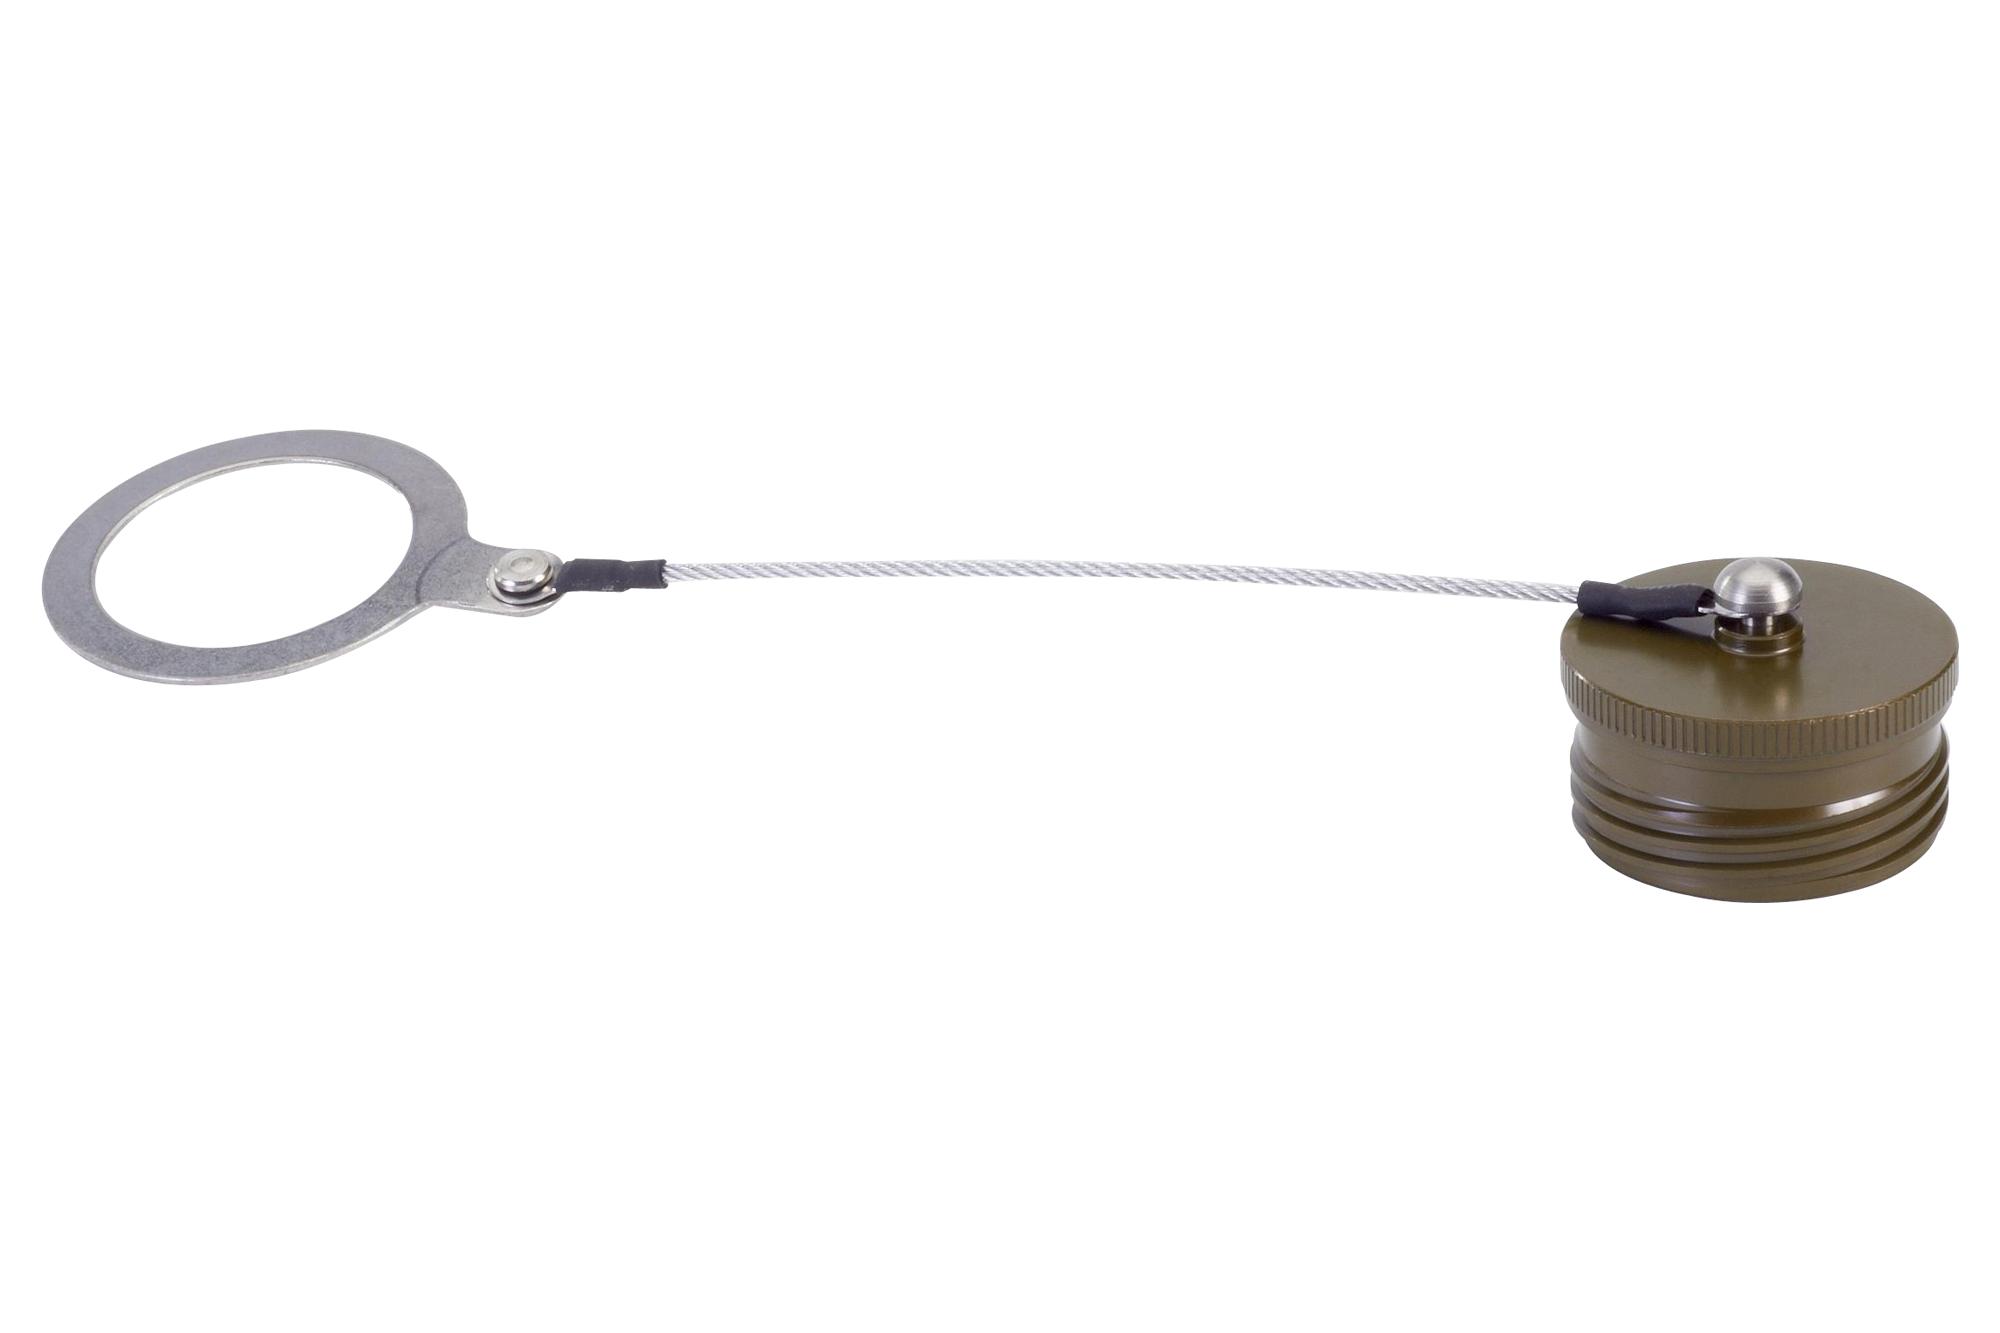 Amphenol Pcd D38999/33W11N Dust Cap W/rope And Ring, Shell Size 11